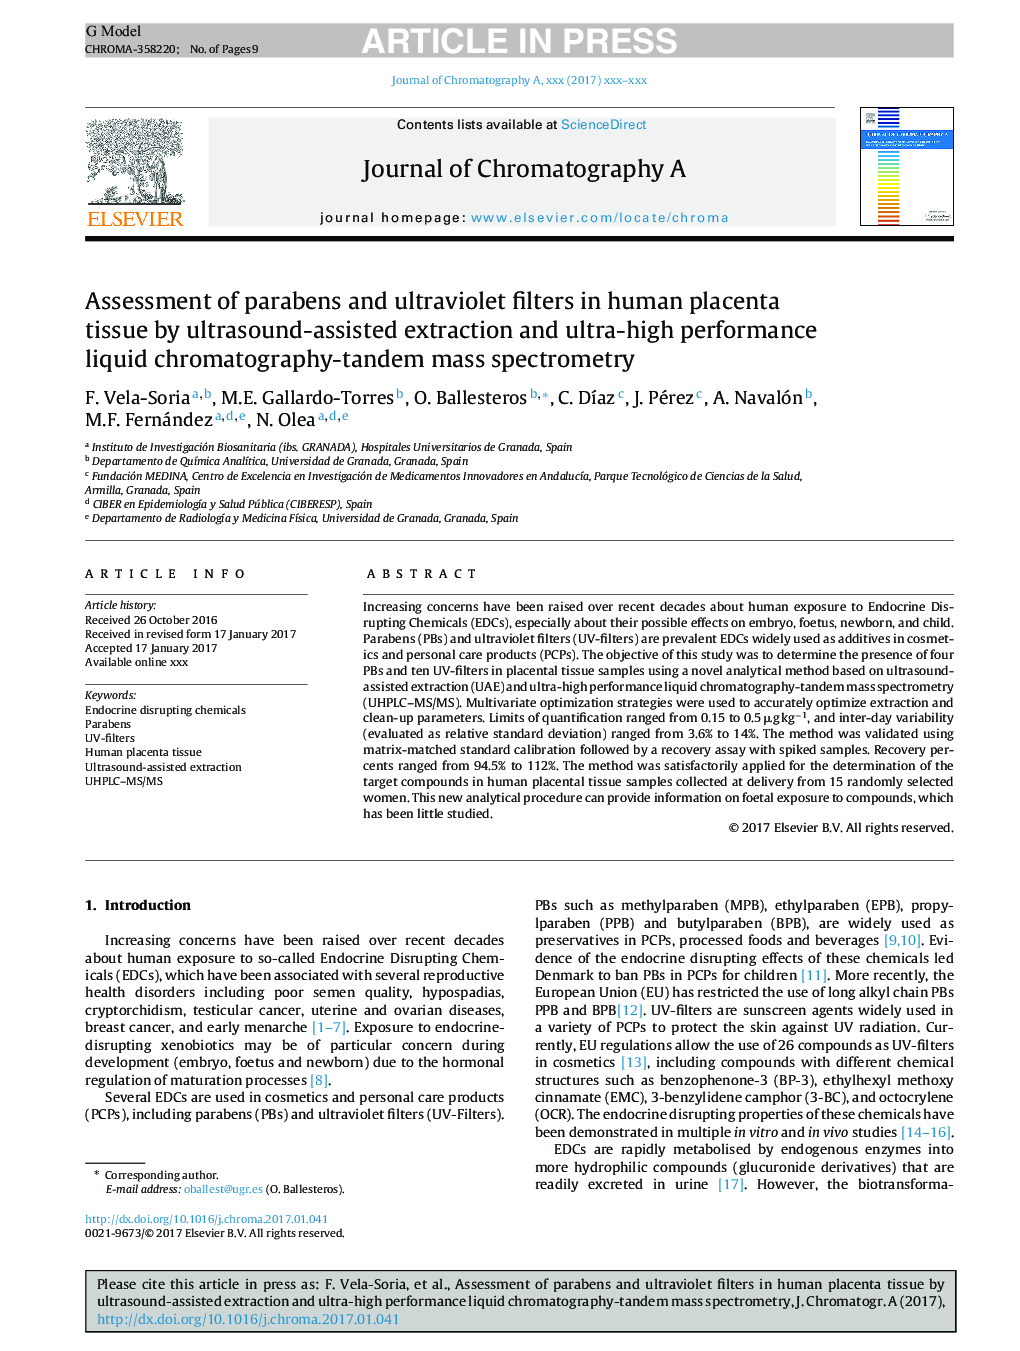 Assessment of parabens and ultraviolet filters in human placenta tissue by ultrasound-assisted extraction and ultra-high performance liquid chromatography-tandem mass spectrometry